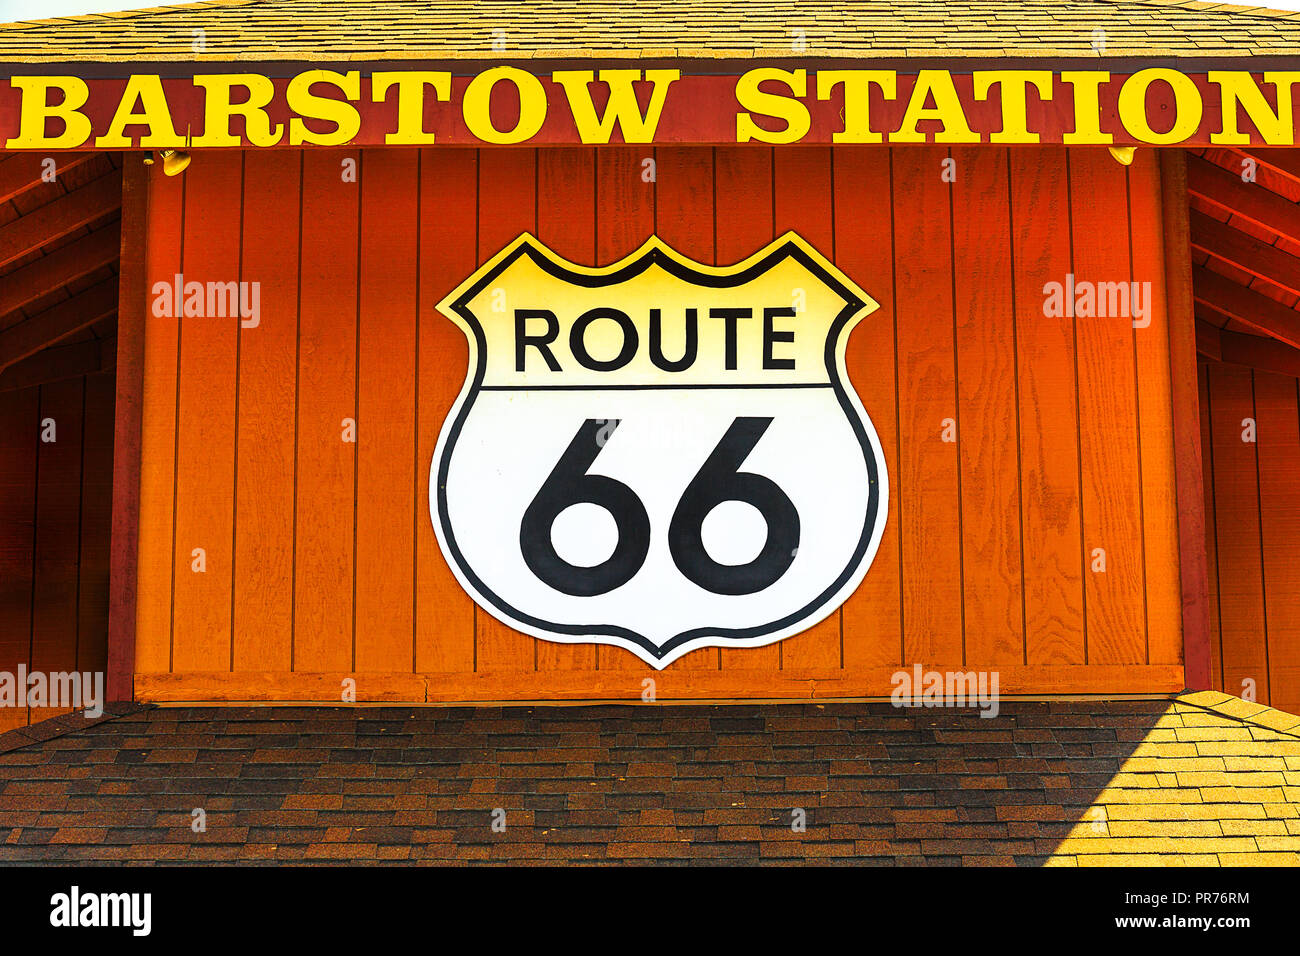 Barstow, California, USA - August 15, 2018: famous Barstow Station on Main Street or Americas Freeway Route 66. Here it is: McDonald's, Panda Express, Subway, Dunkin Donuts and Route 66 Hot Dog Stands Stock Photo